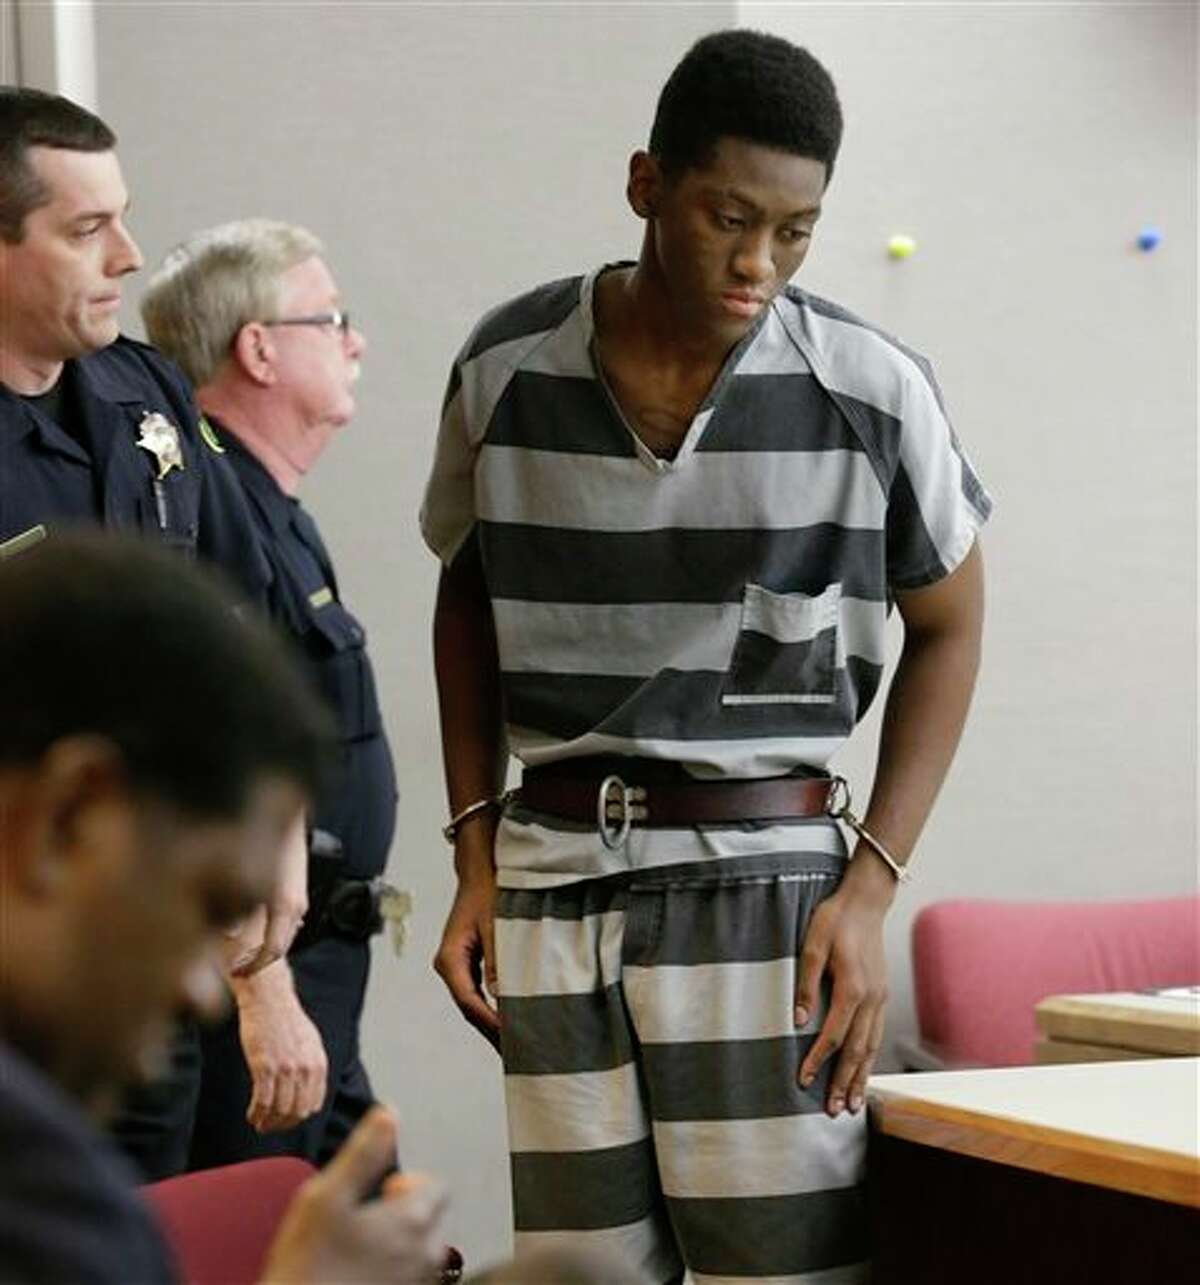 Sir Young, 20, is led into court before a hearing in Dallas Thursday, May 8, 2014. A district court judge has reversed a previous order and imposed a series of probationary requirements for the 20-year-old man convicted of raping a schoolmate. The initial punishment for Young sparked a backlash when a prior judge in Dallas sentenced him to five years of probation and declined to impose standard conditions of probation for sex offenders. (AP Photo/LM Otero)